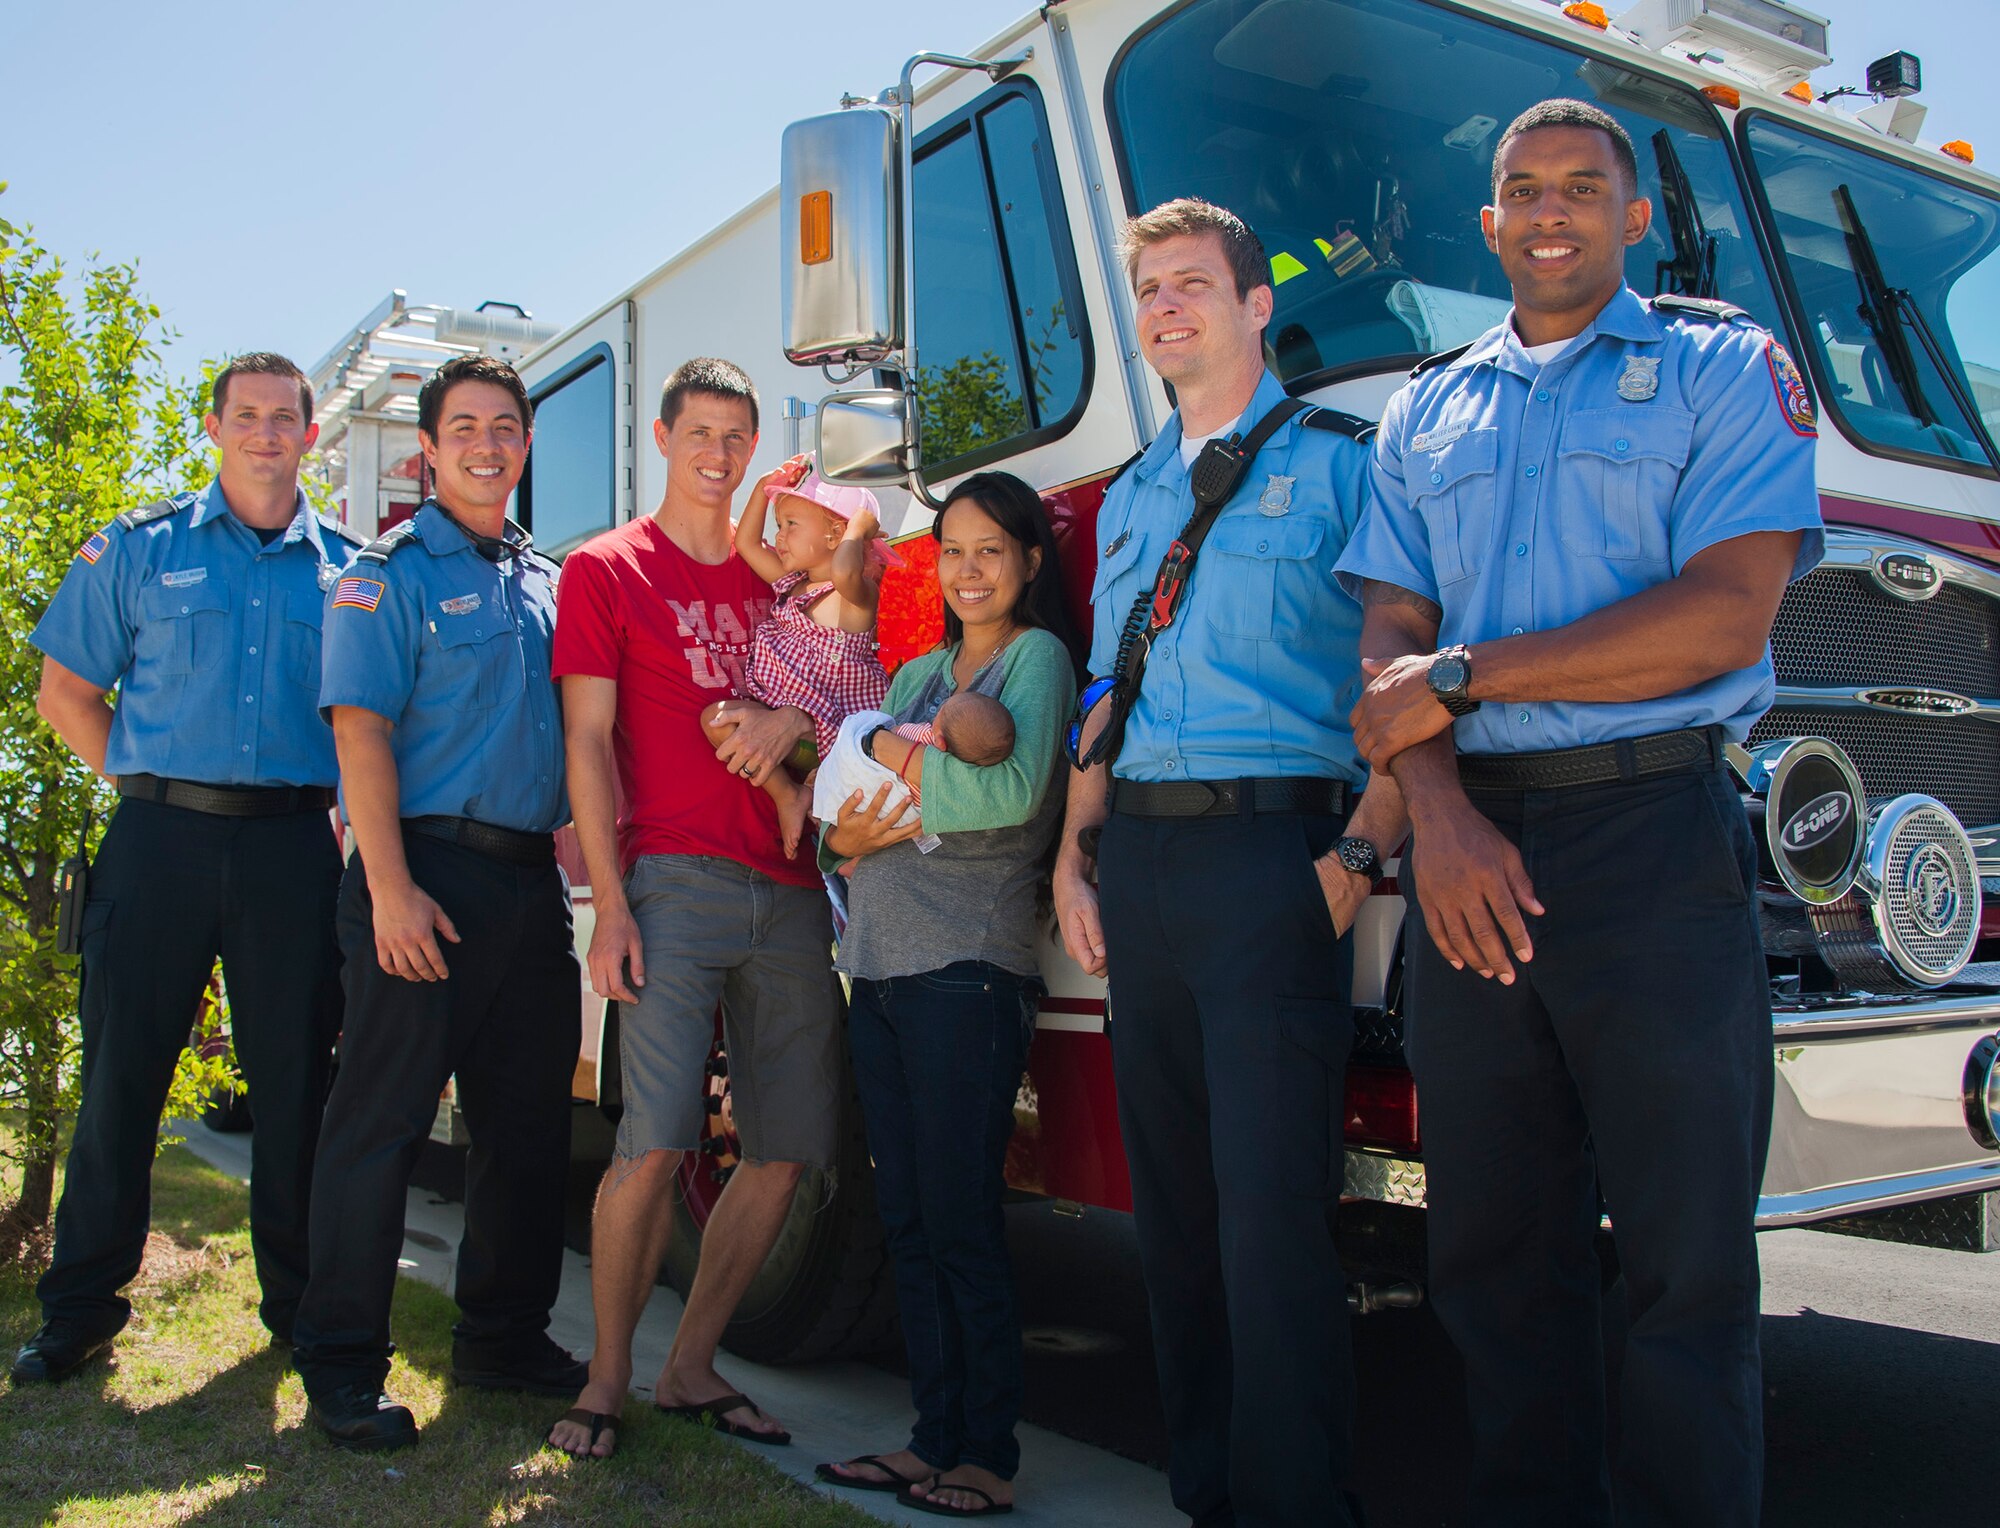 Kyle Vaughn, Timothy Panzer, Mark Merrill and Walter Carney, all 96th Civil Engineer Group firefighters, stand with Airman 1st Class Josiah Zimmerman, his wife, Leana, and their children during a visit June 20, 2016, at Eglin Air Force Base, Fla. The firefighters helped the Zimmermans deliver their baby boy, Luca, at their home on base after responding to a 911 call. (U.S. Air Force photo/Ilka Cole)